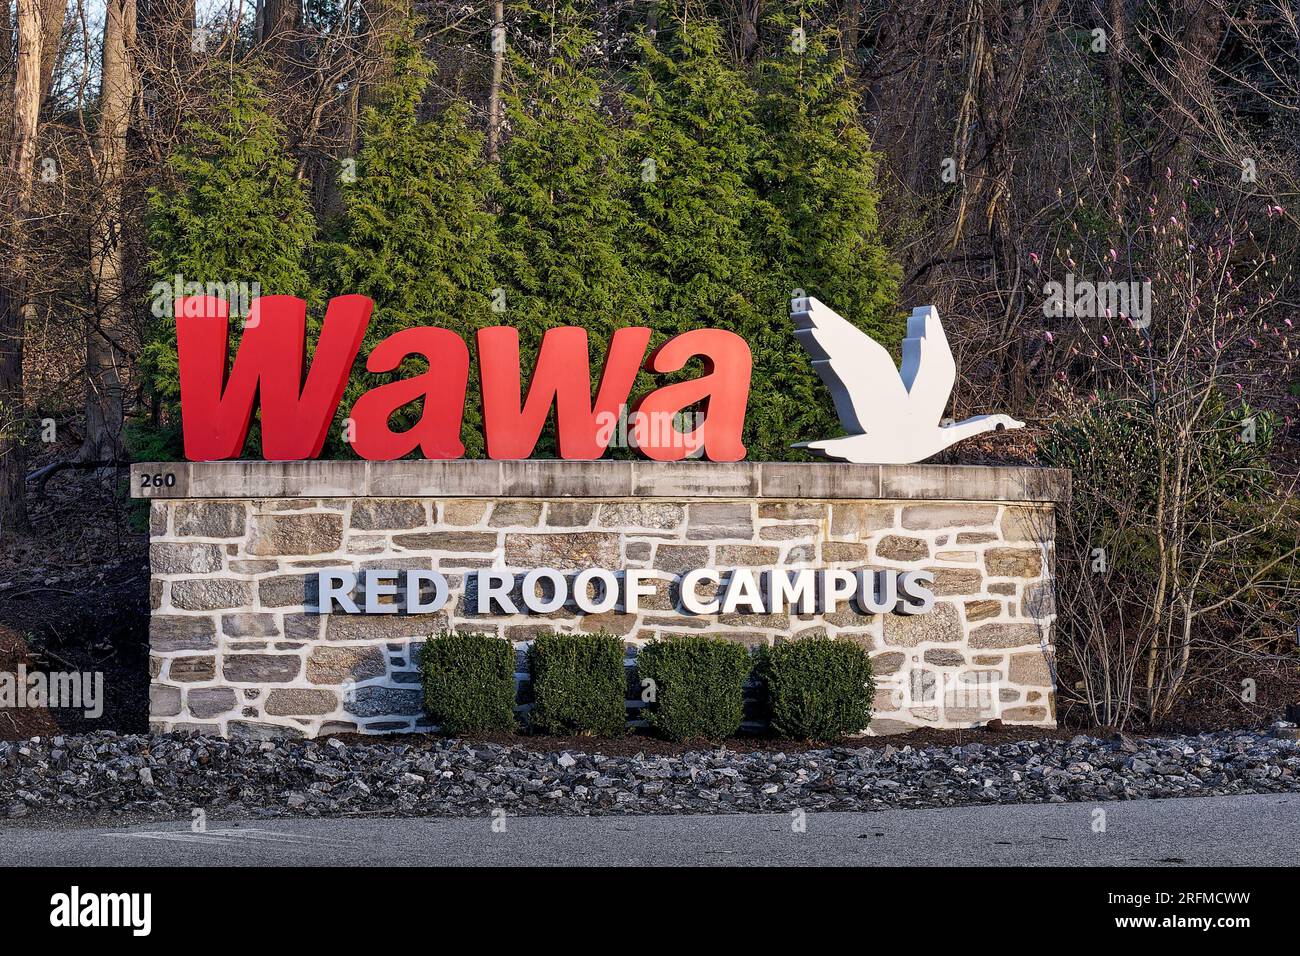 Chester Heights, PA - April 2, 2023: Sign at the entrance to WAWA Red Roof Campus, their corporate headquarters complex at 260 W Baltimore Pike. Stock Photo